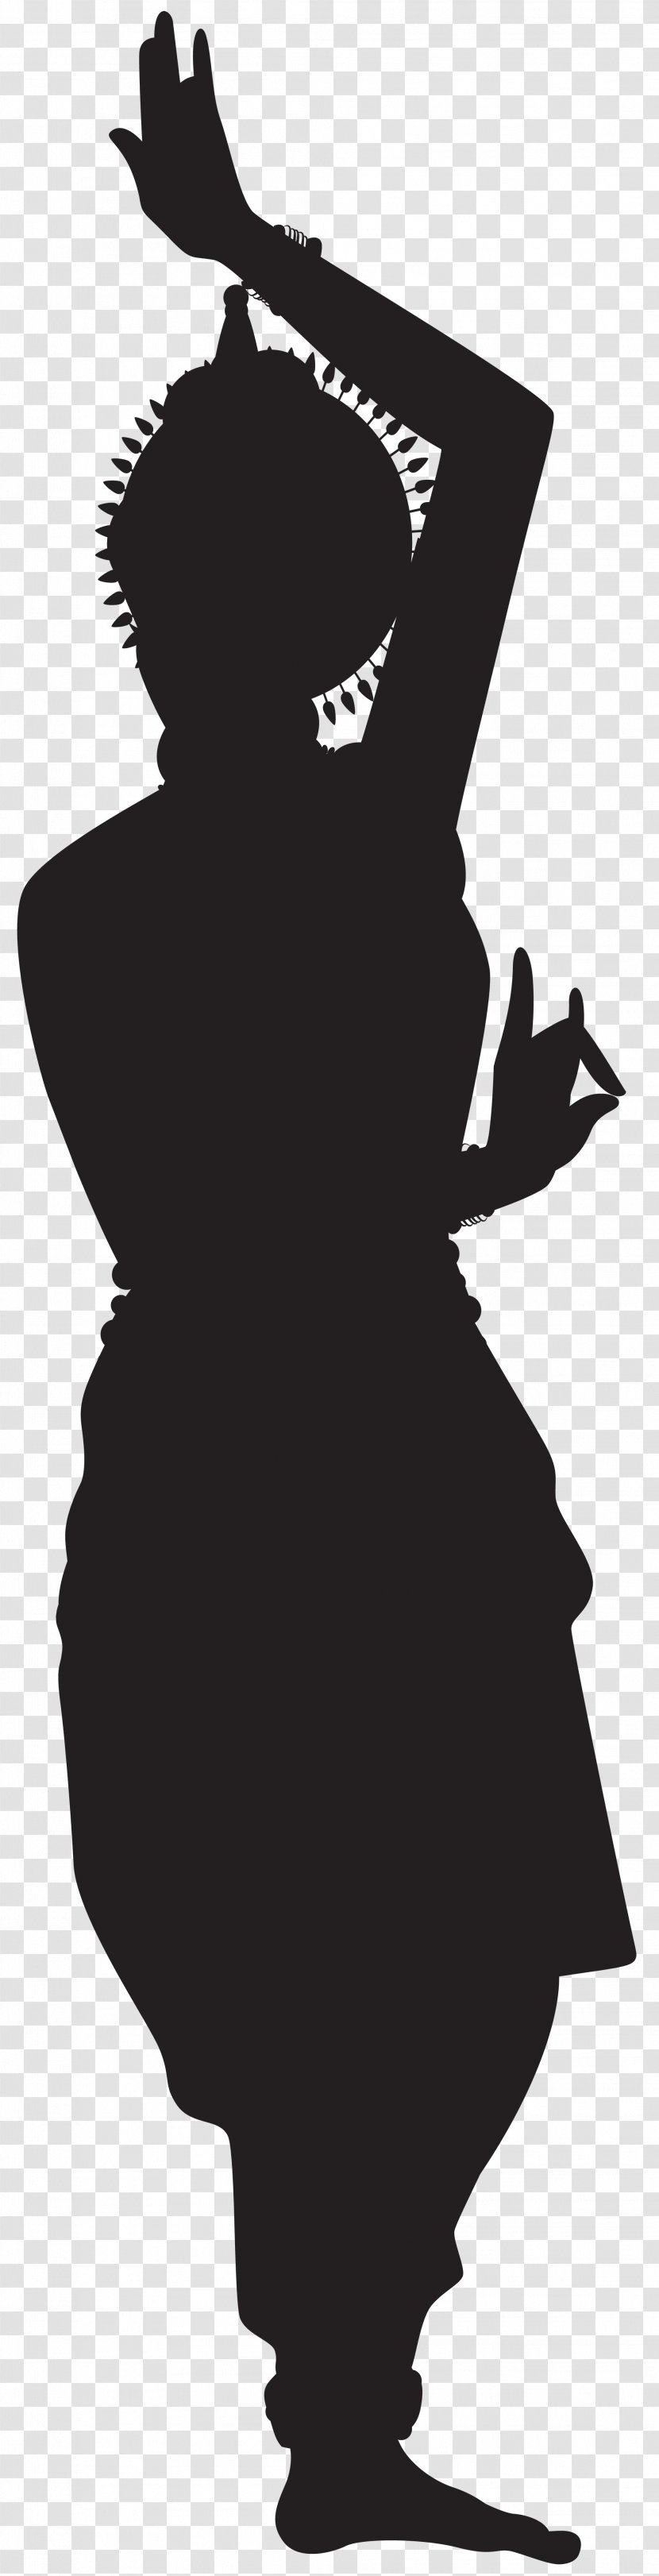 Silhouette Black And White Dance Clip Art - In India Transparent PNG